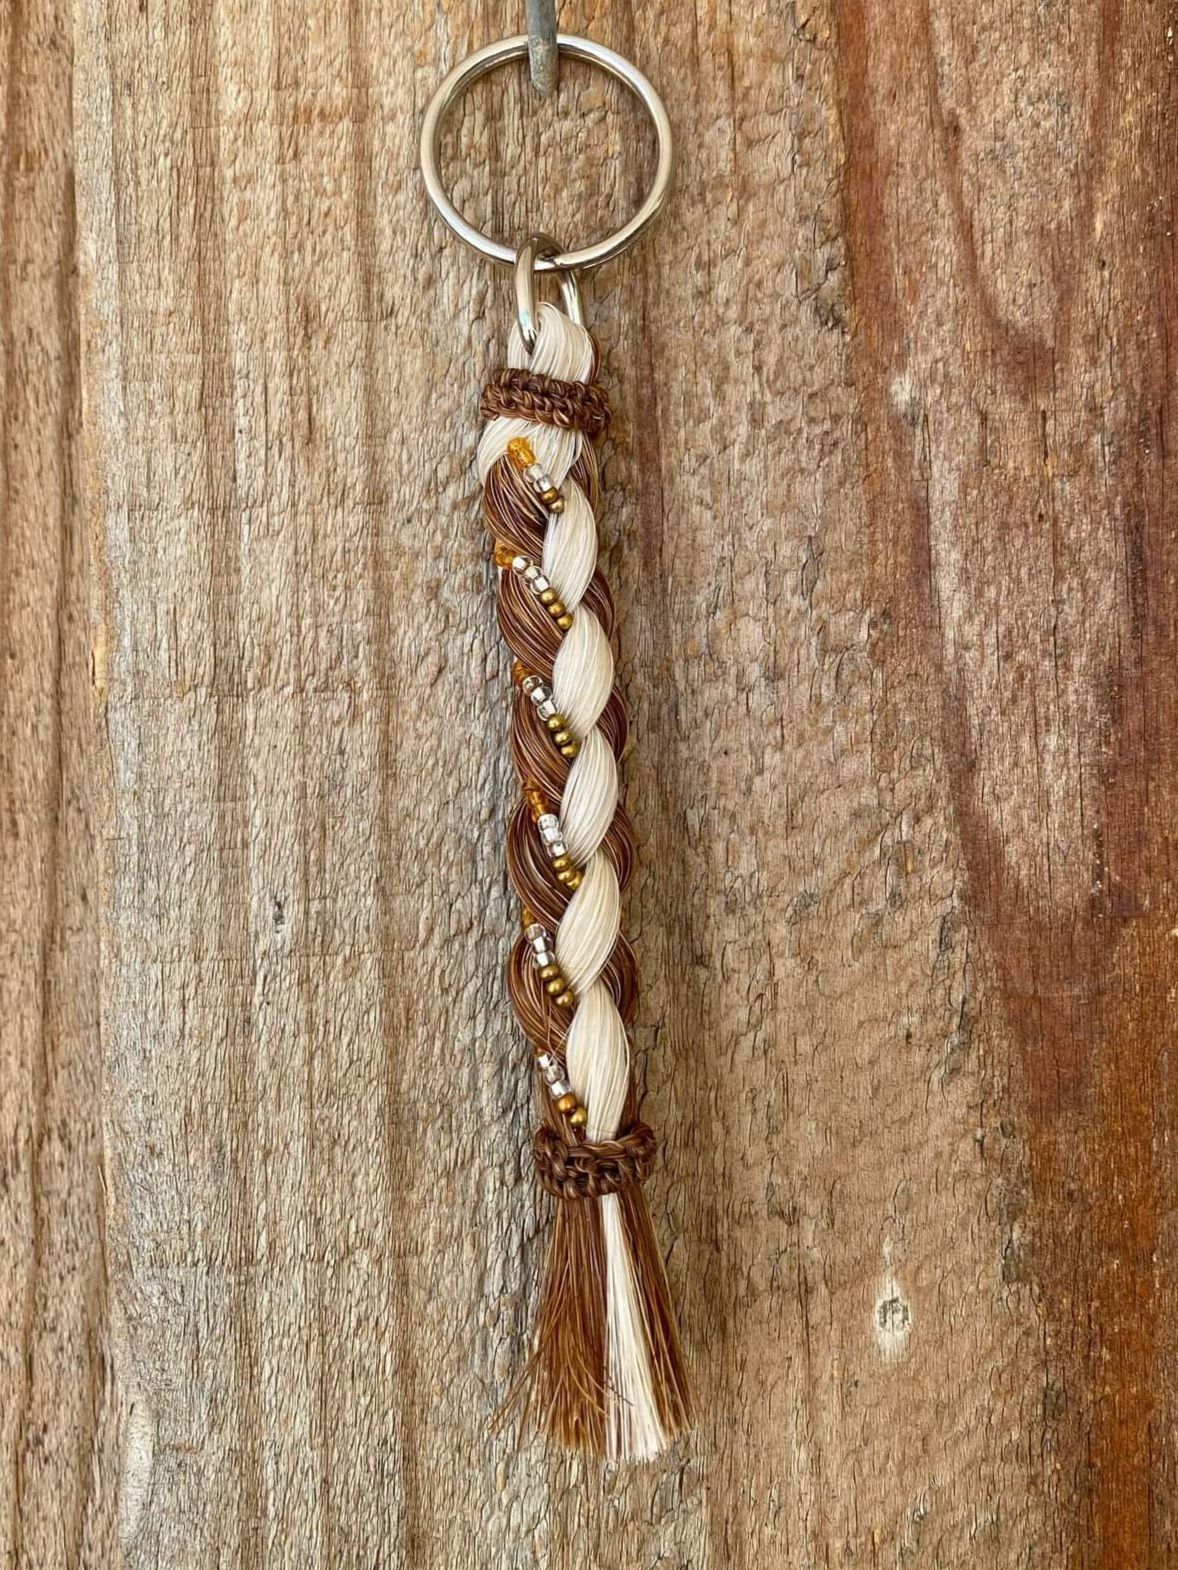 Gift - Genuine Horsehair Braided Tail Key Ring with Beads